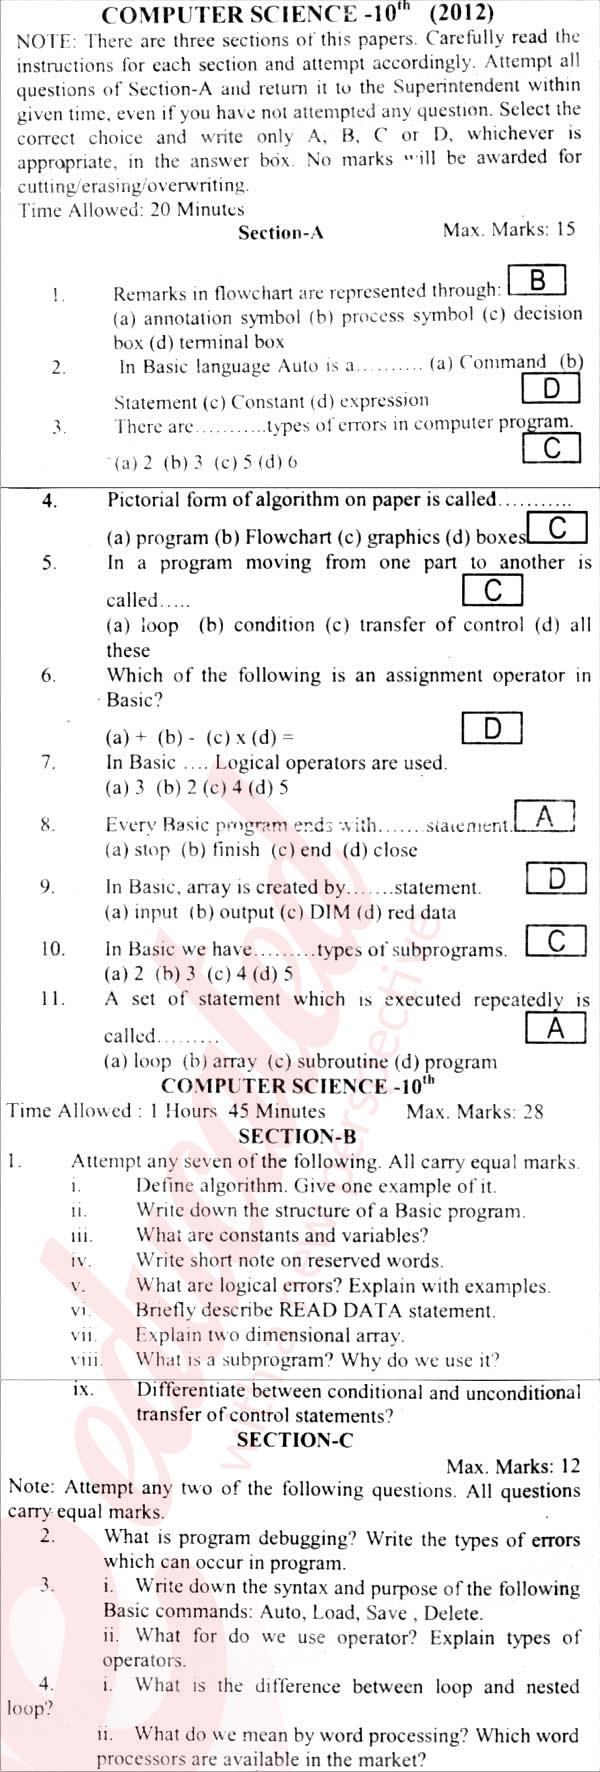 Computer Science 10th English Medium Past Paper Group 1 BISE Abbottabad 2012